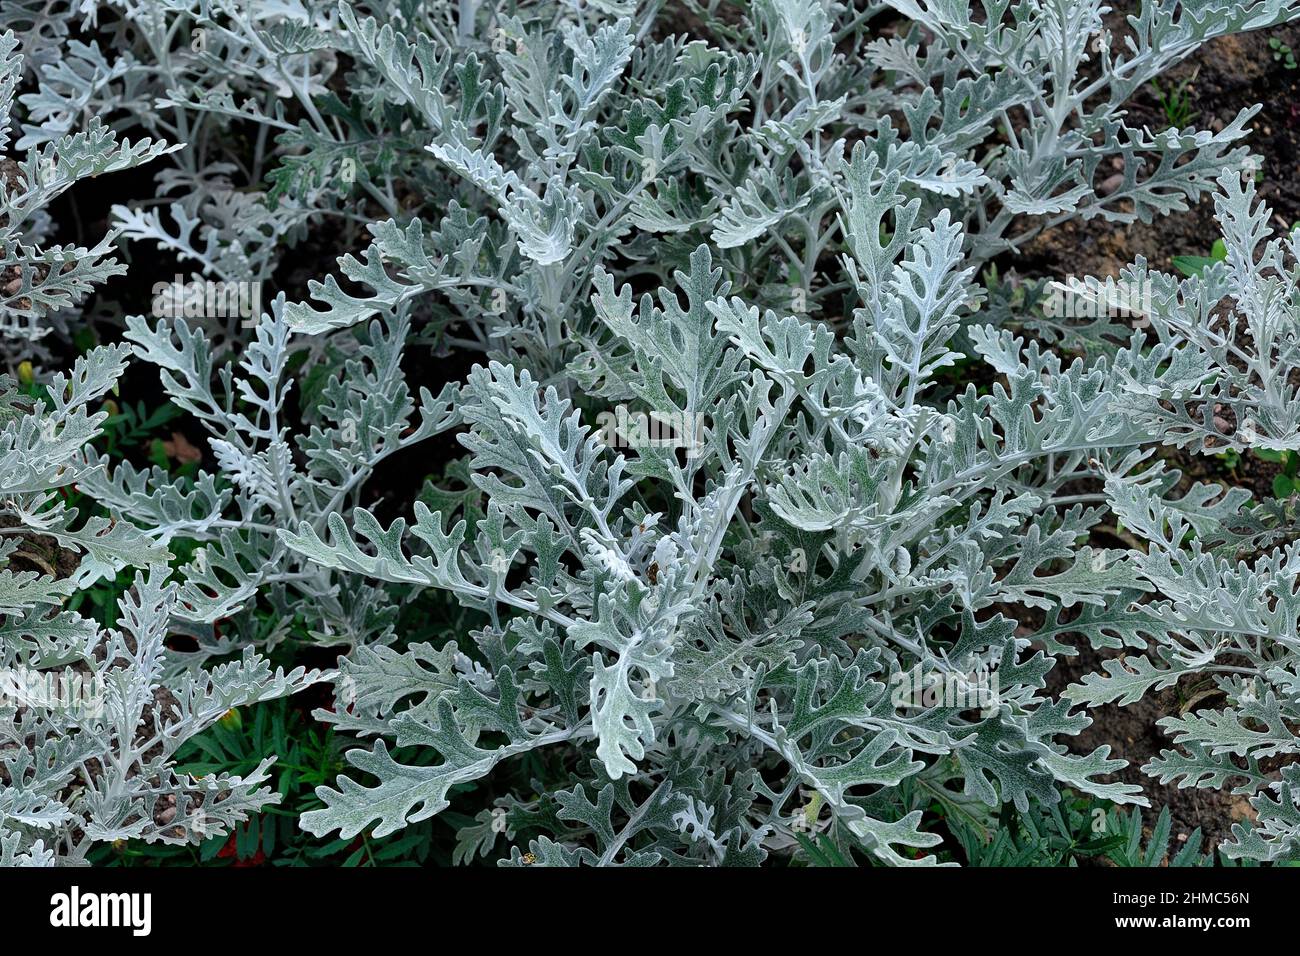 Jacobaea maritima (Senecio Cineraria) or Silver ragwort - ornamental plant for gardening or landscaping. Silvery fluffy leaves of Cineraria on flowerb Stock Photo